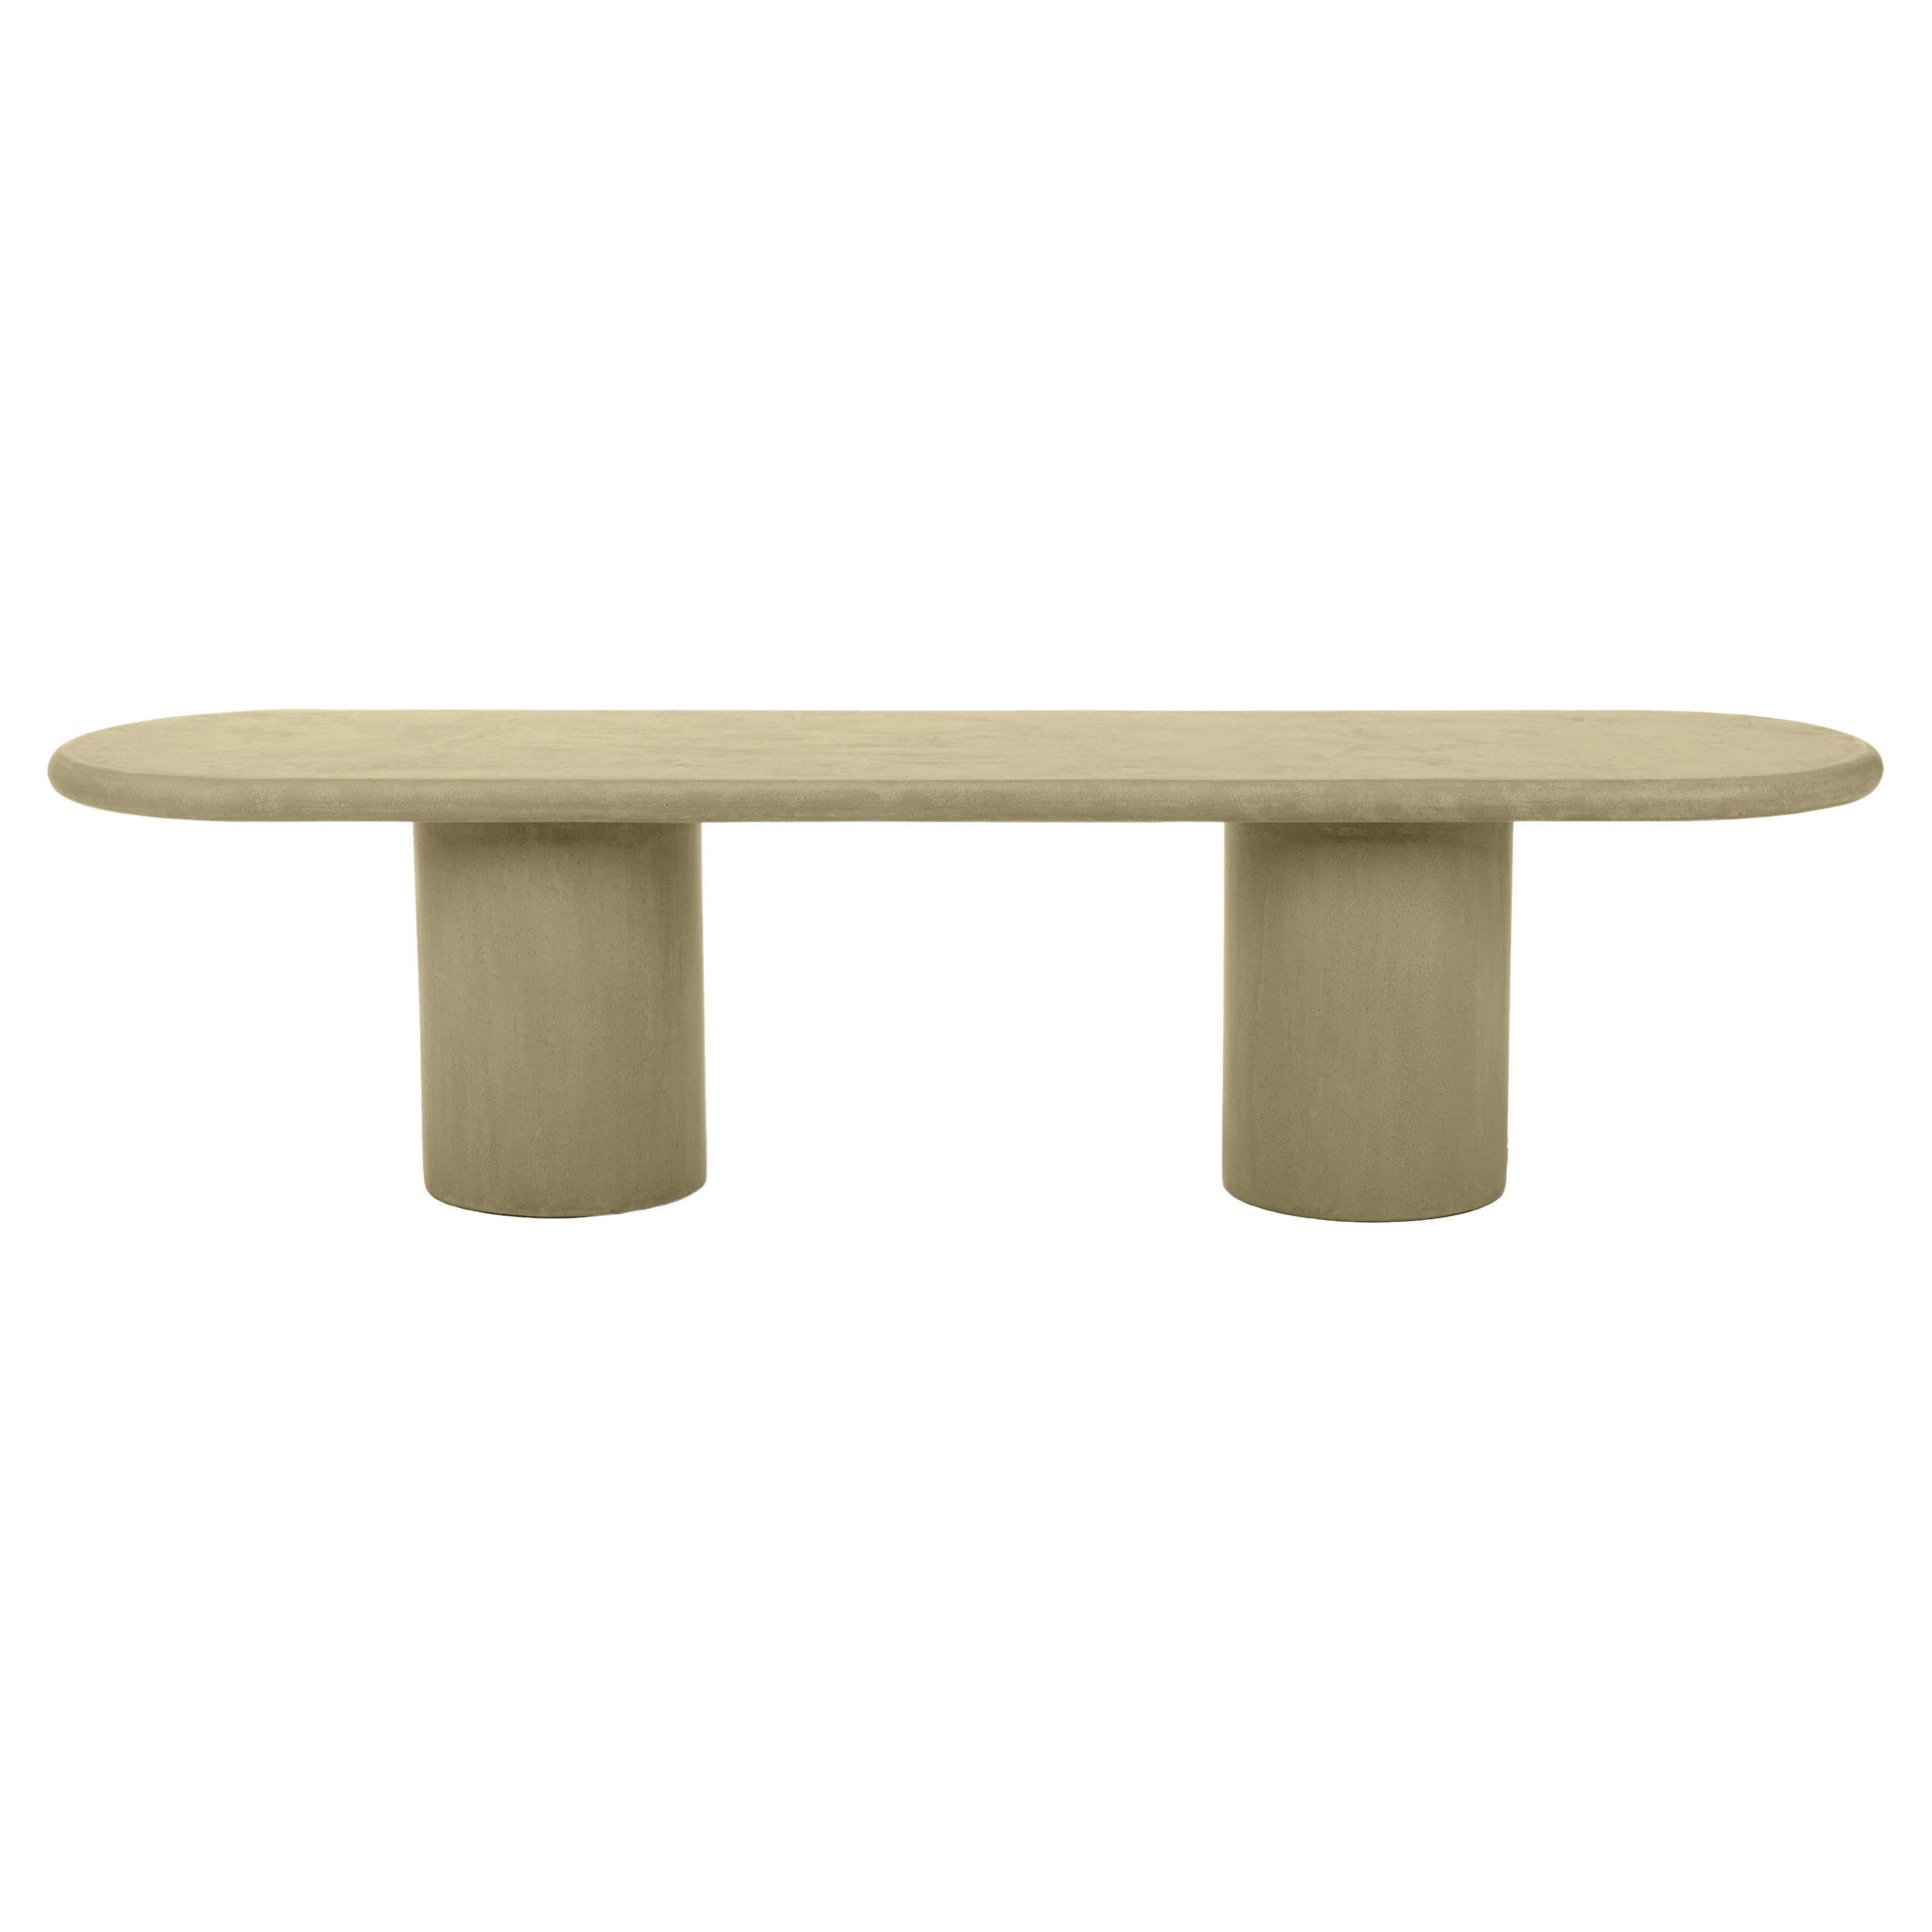 Mortex Bench "Column" 200 by Isabelle Beaumont For Sale